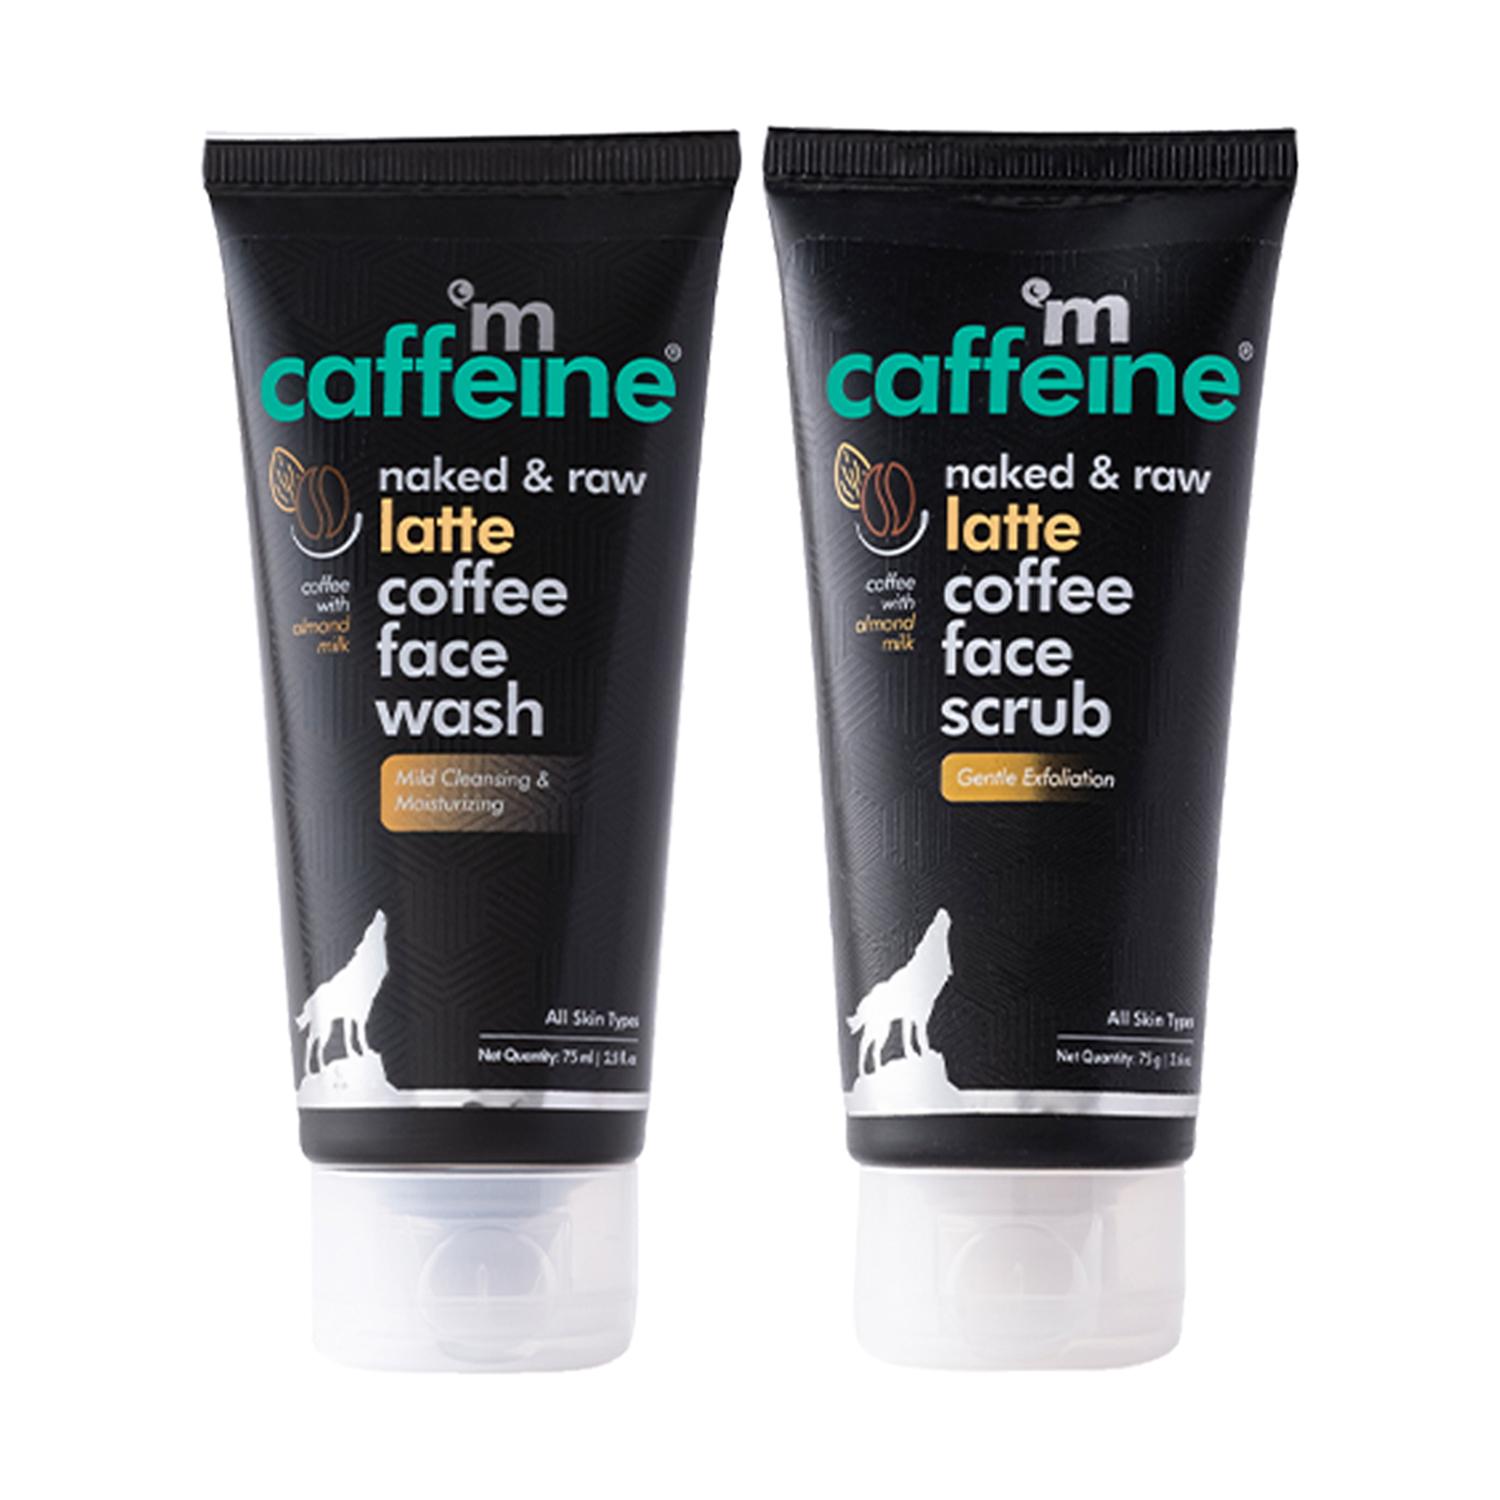 mCaffeine | mCaffeine Coffee Face Wash & Scrub Combo Reduces Acne Pimple & Tan Gives Glowing Skin Pack of 2